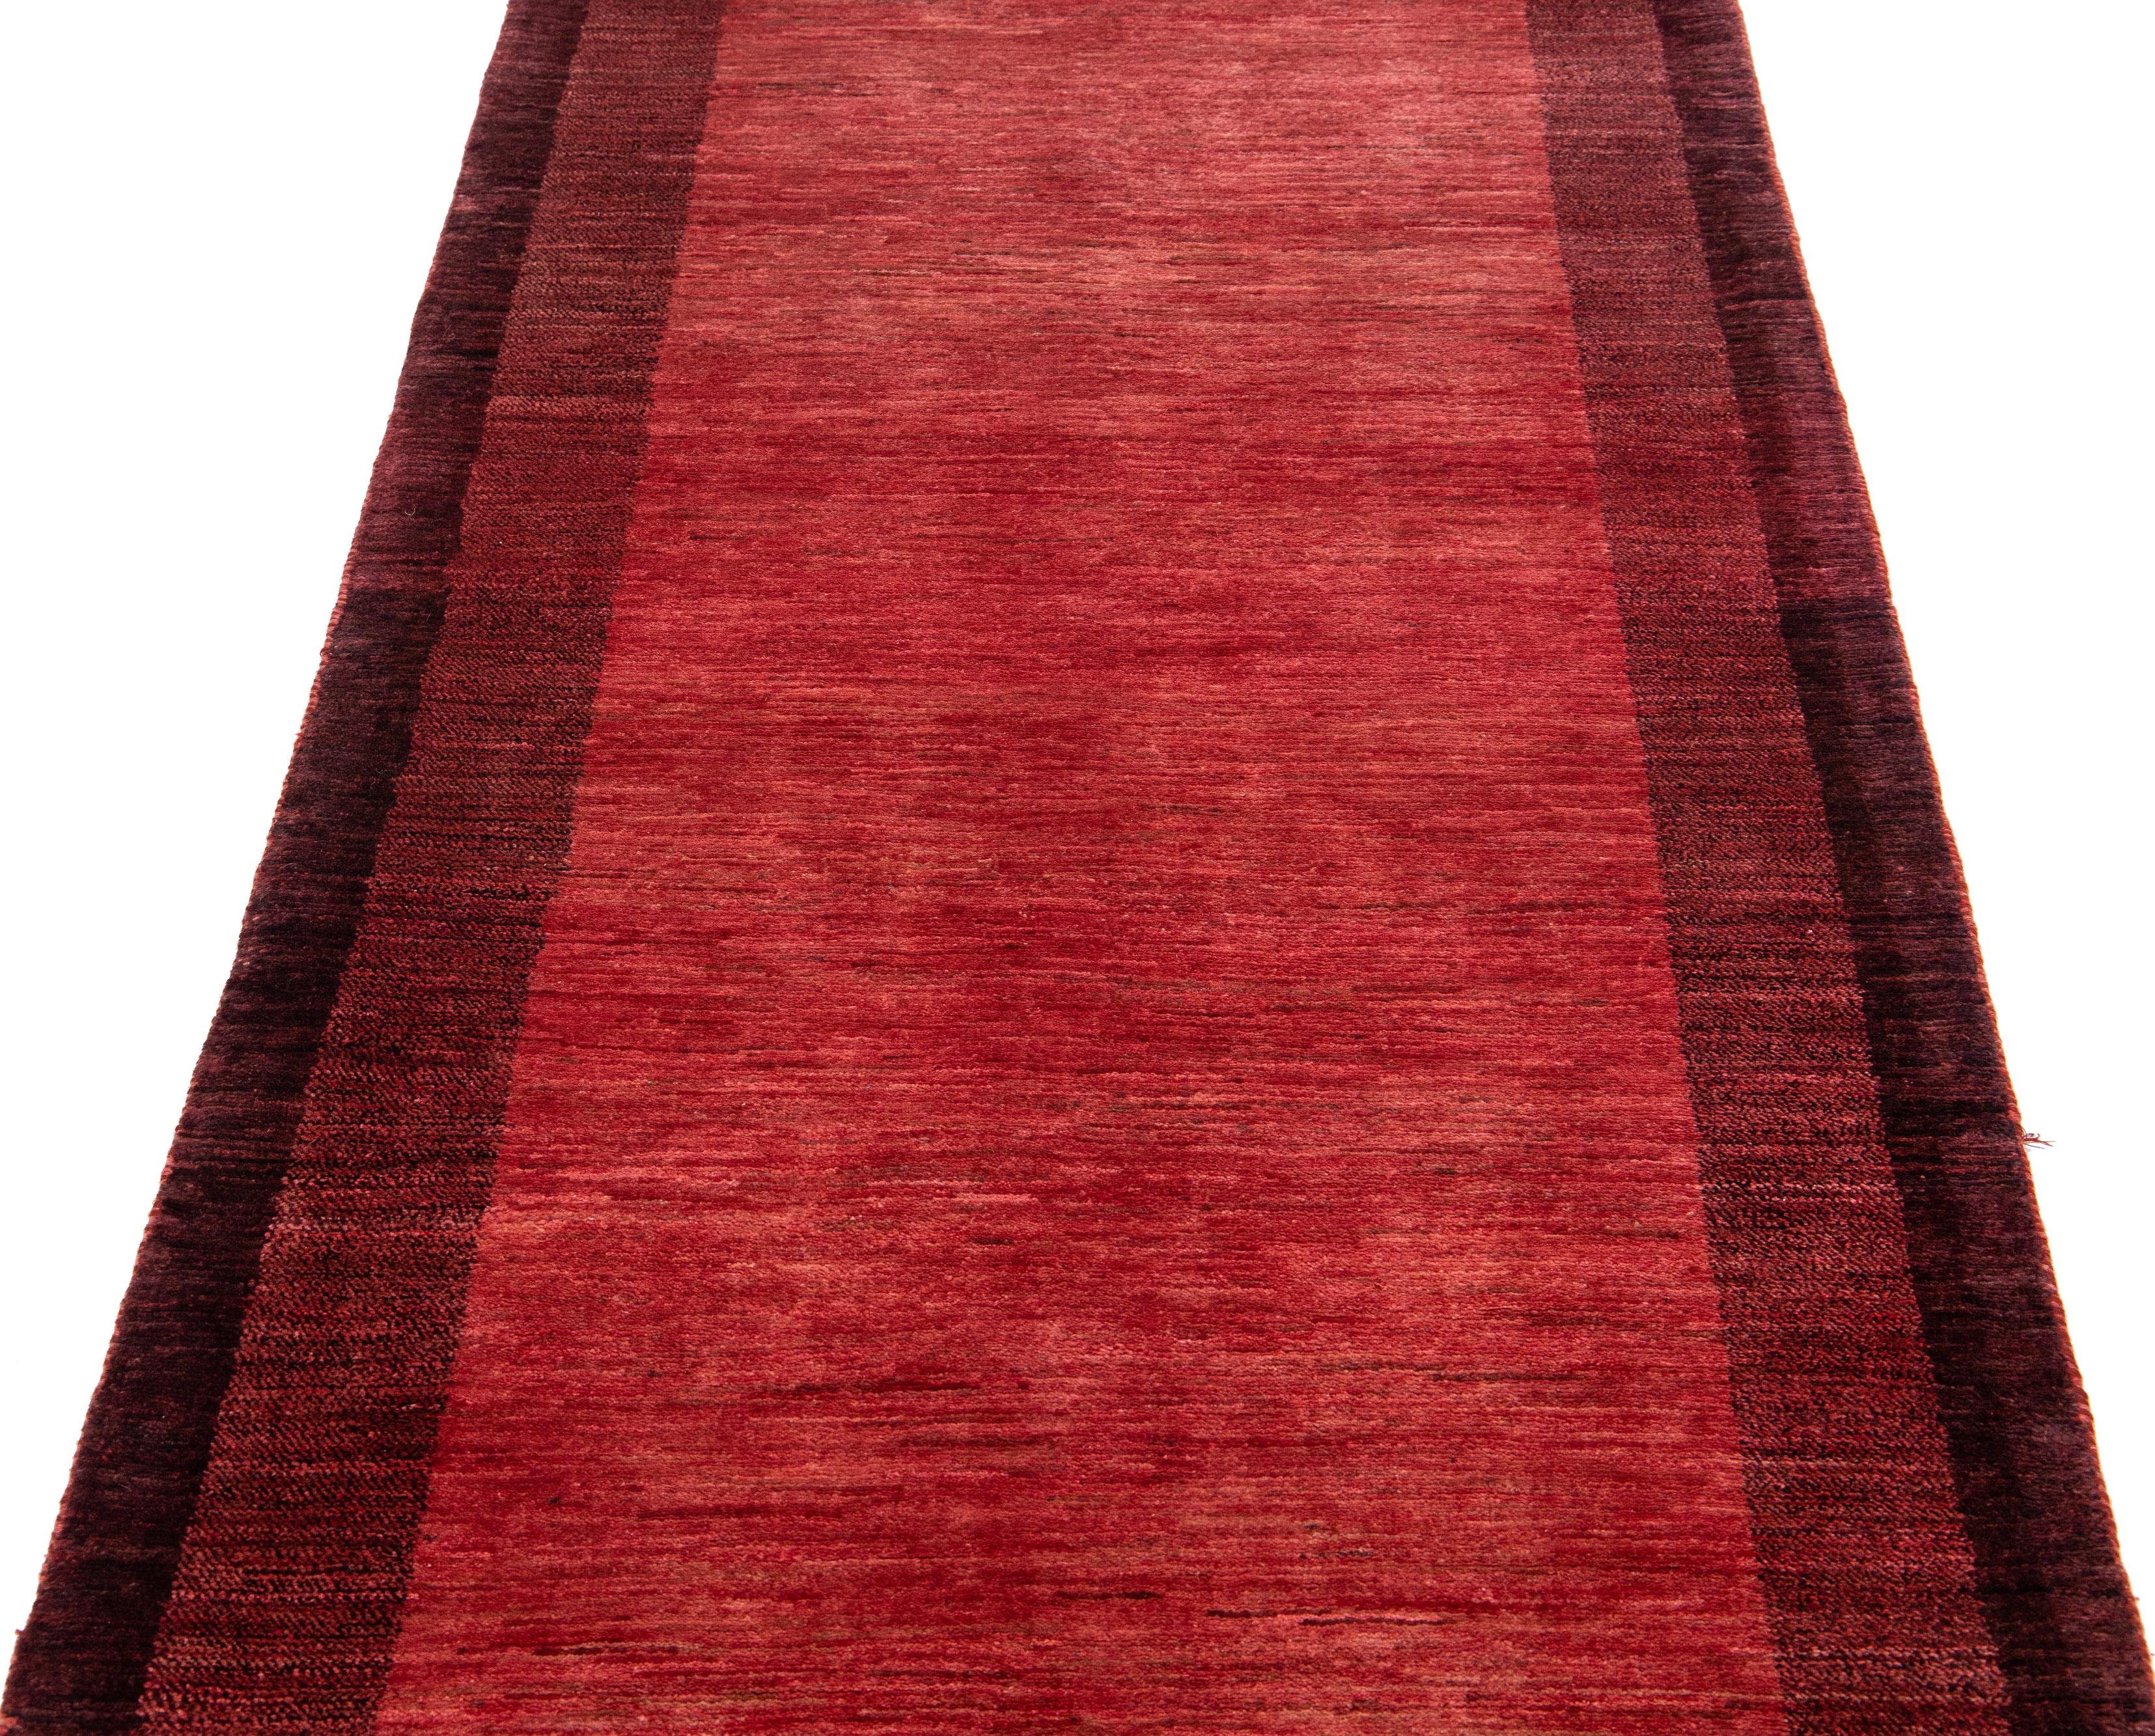 Beautiful modern Gabbeh-style hand-woven wool runner with a red color field. This Persian rug has a gorgeously minimalist design with burgundy accents.

This rug measures: 3'2